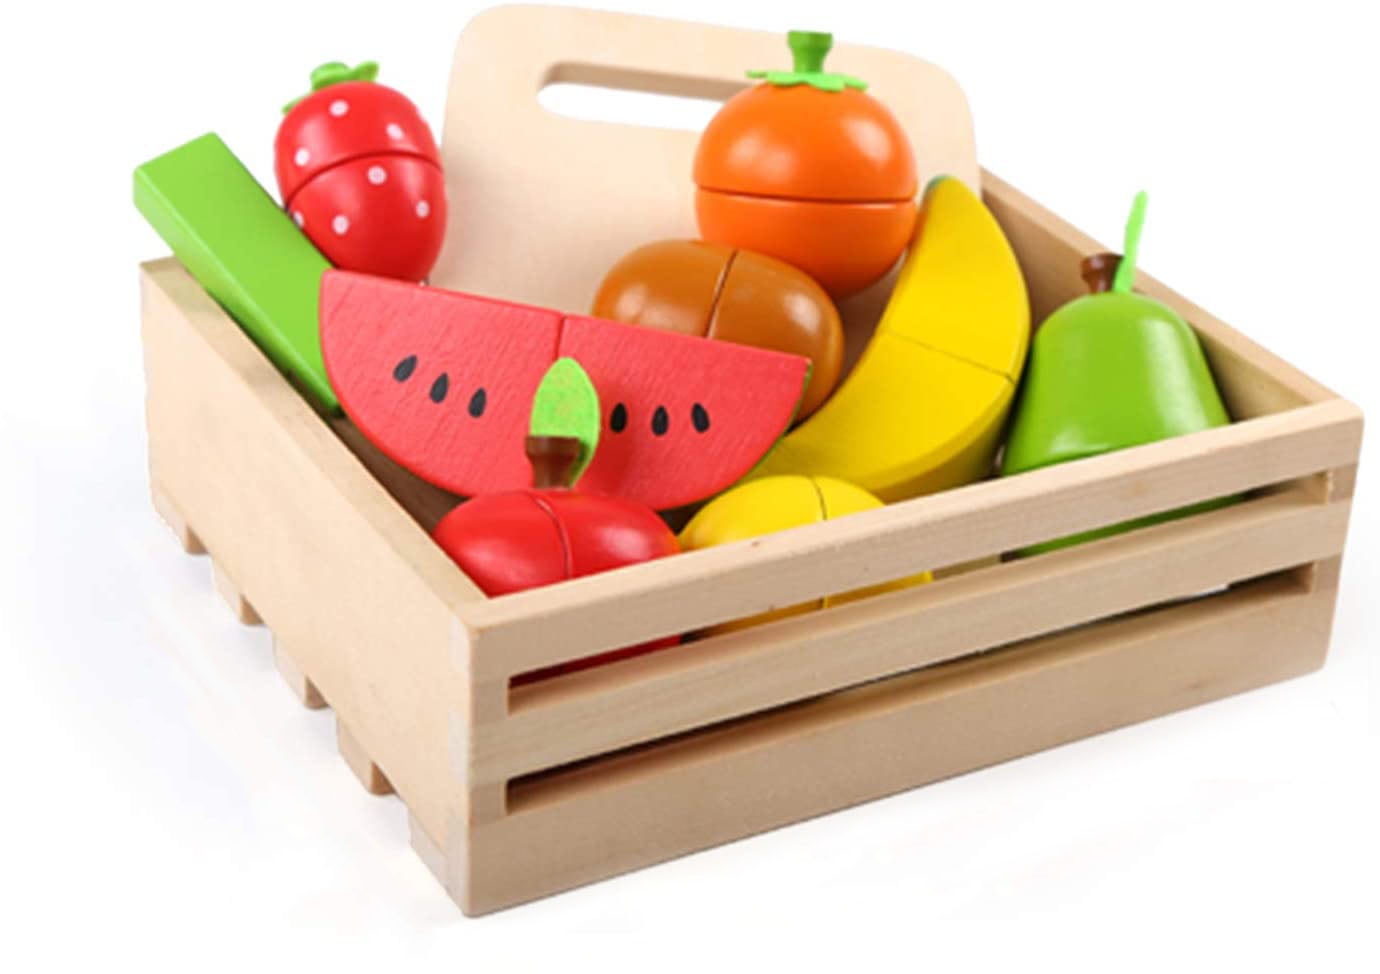 Kids Kitchen Fruit Vegetable Food Pretend Role Play Cutting Set Toys Wooden 